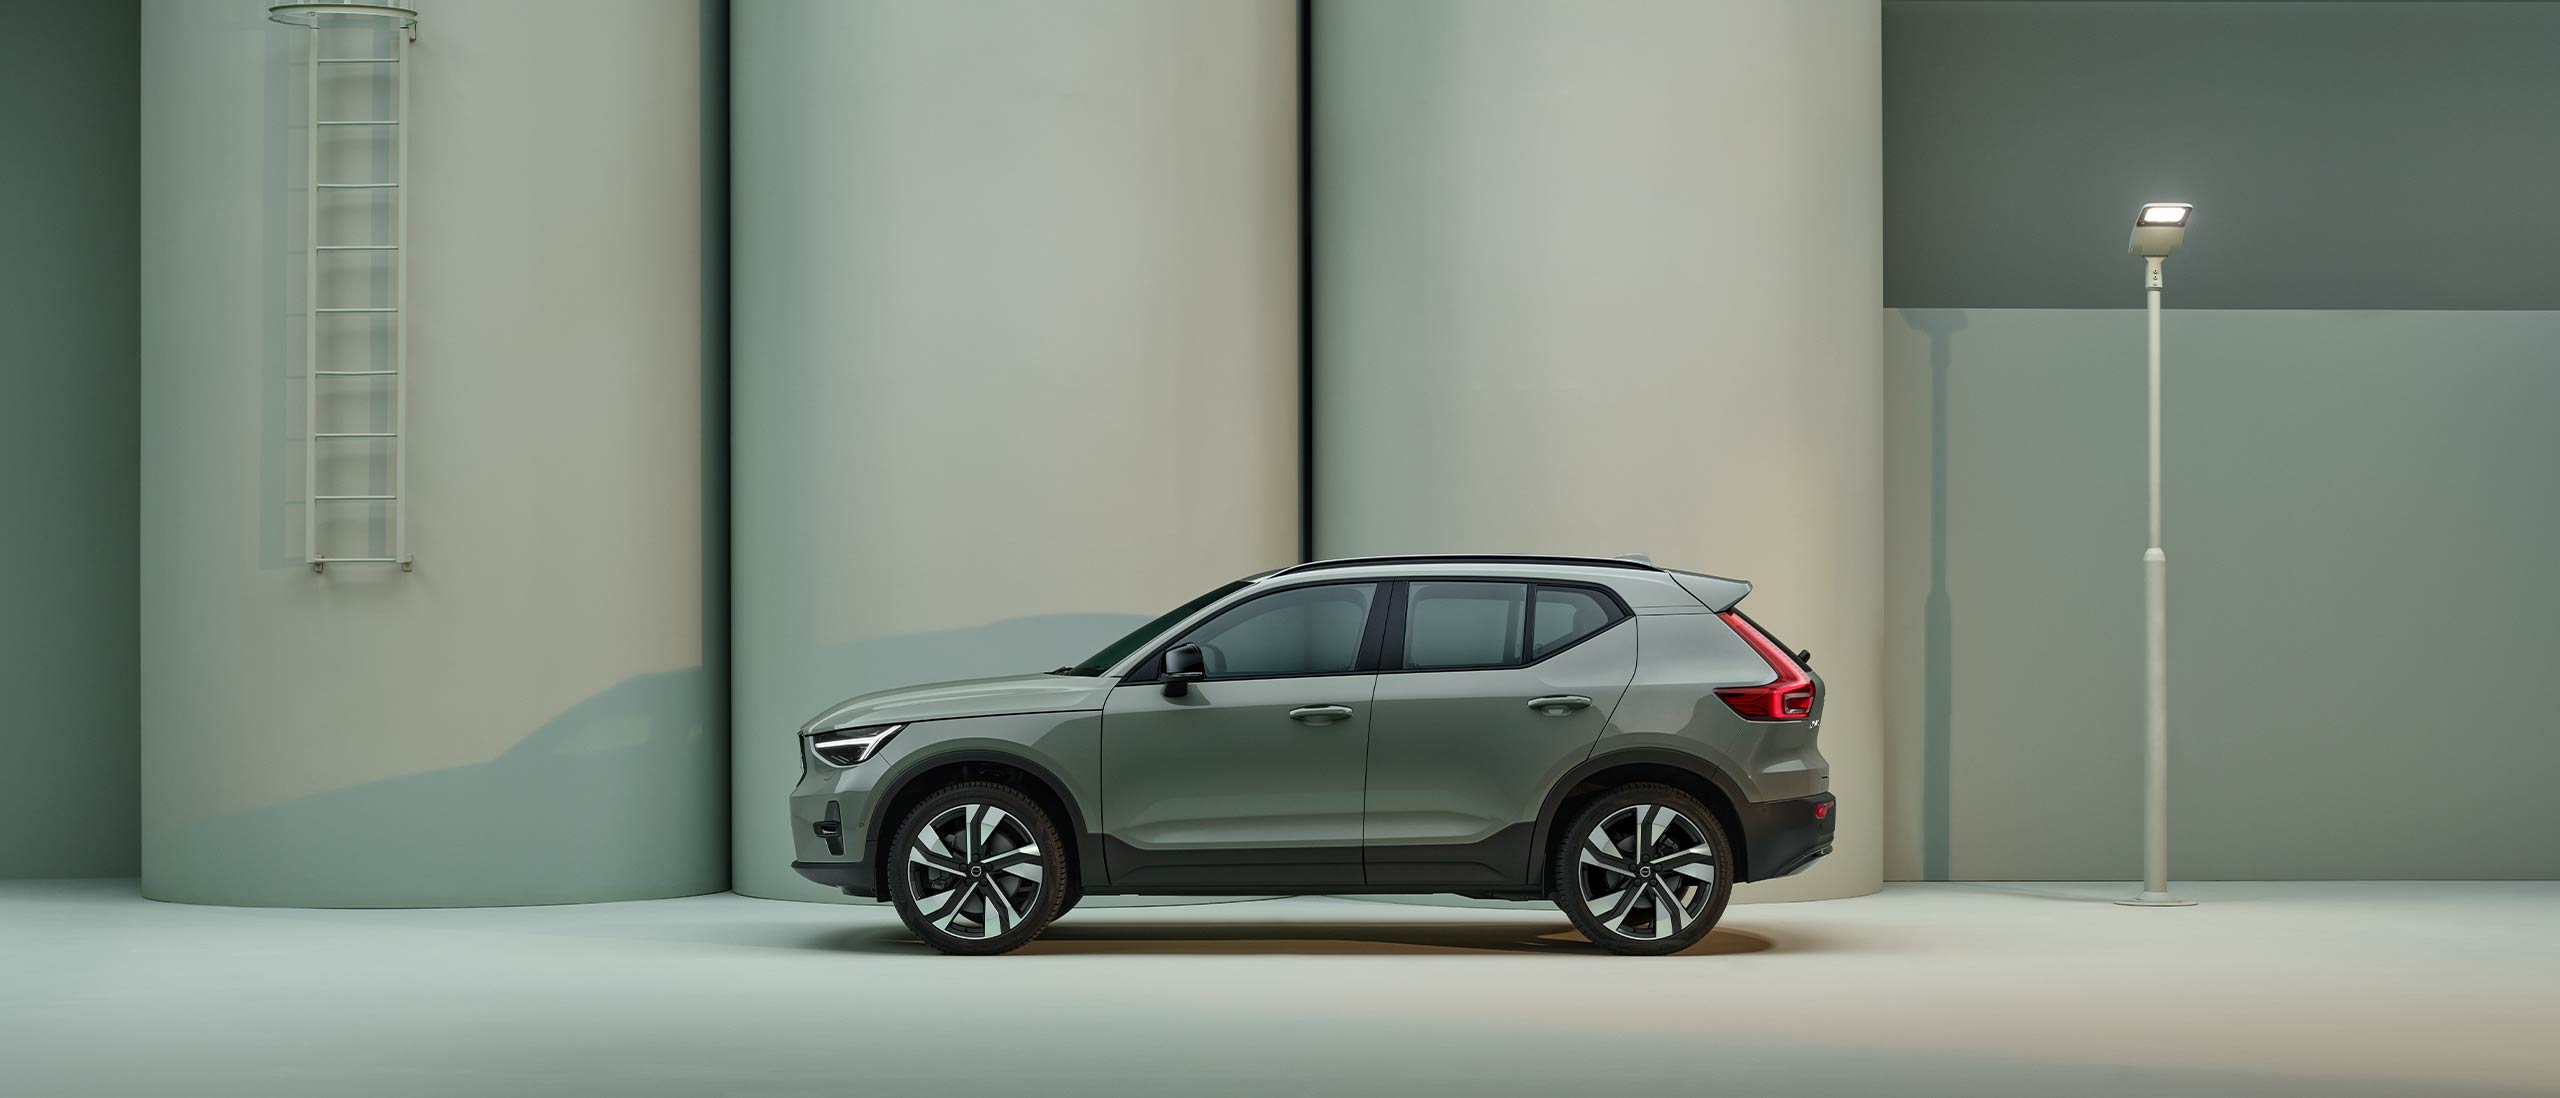 The side profile of a green Volvo XC40 SUV.